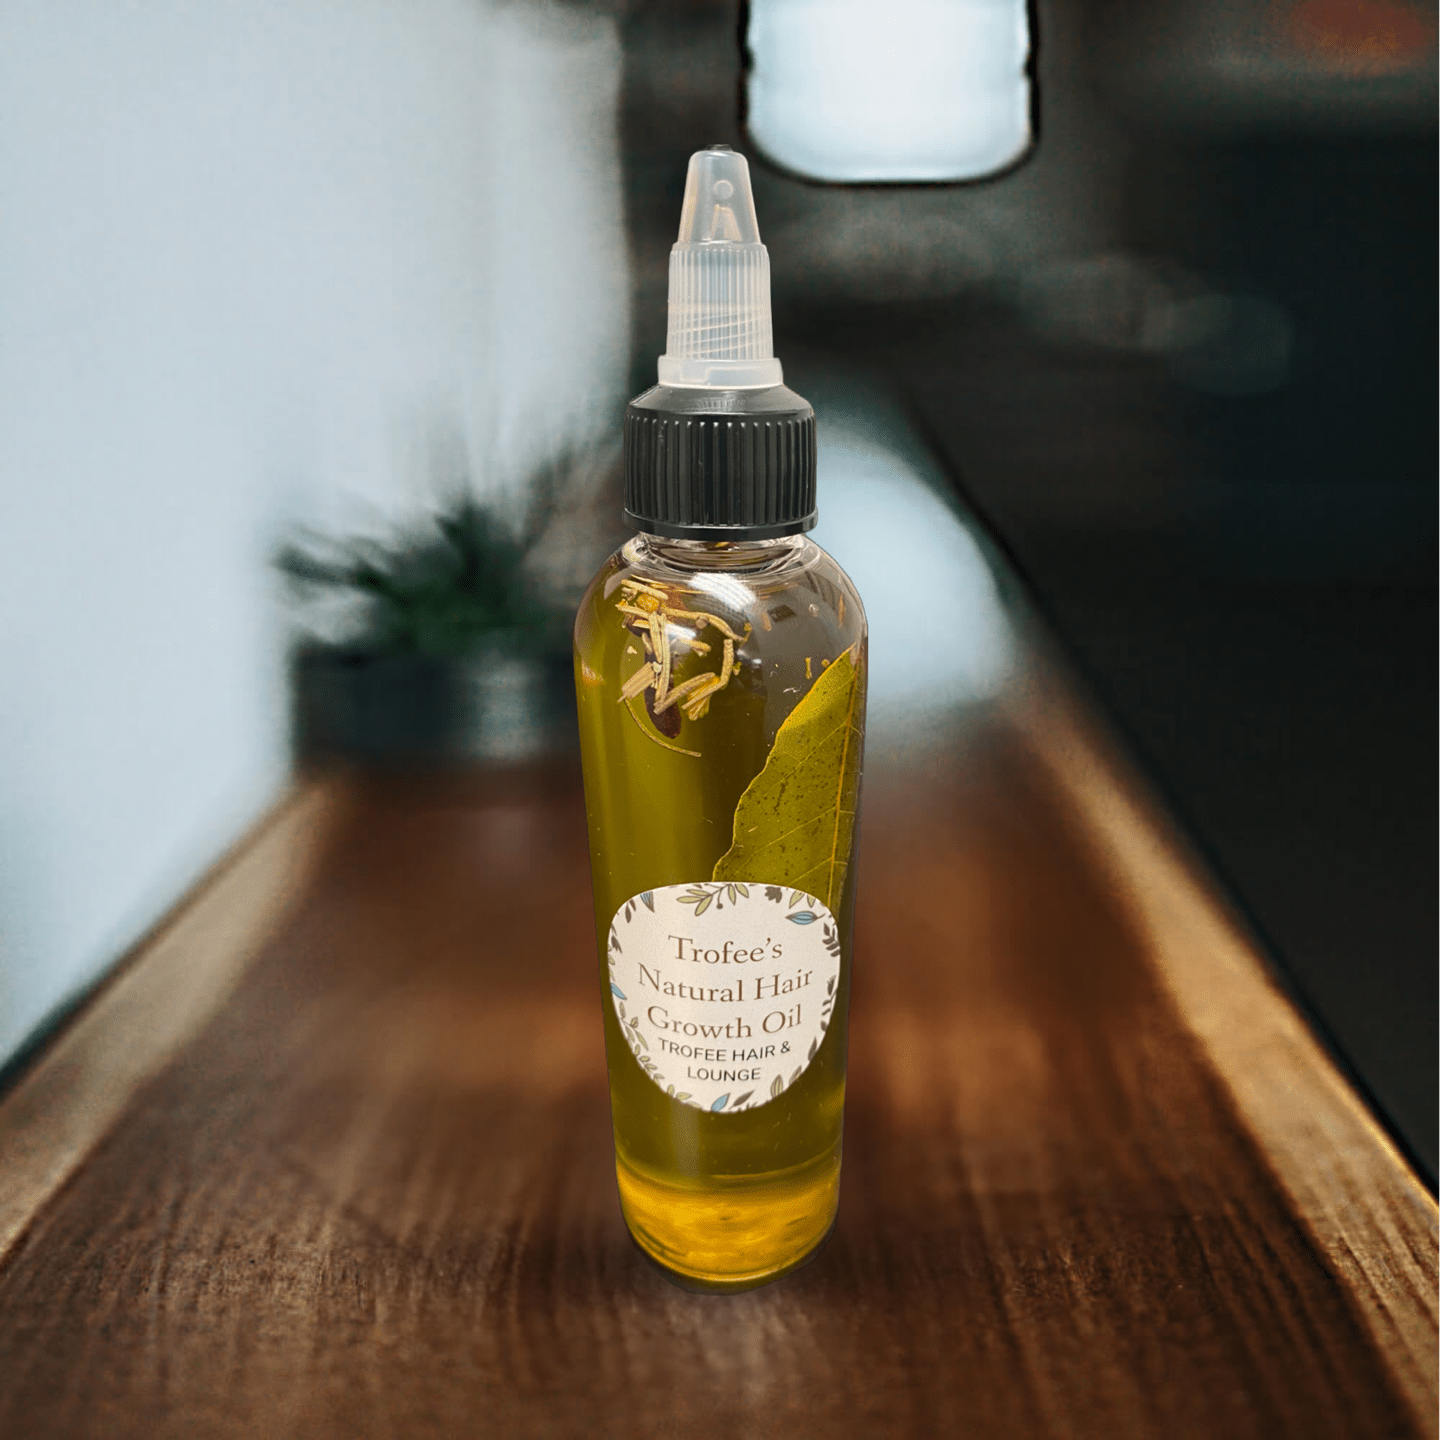 Trofee's Natural Hair Growth Oil - My Store